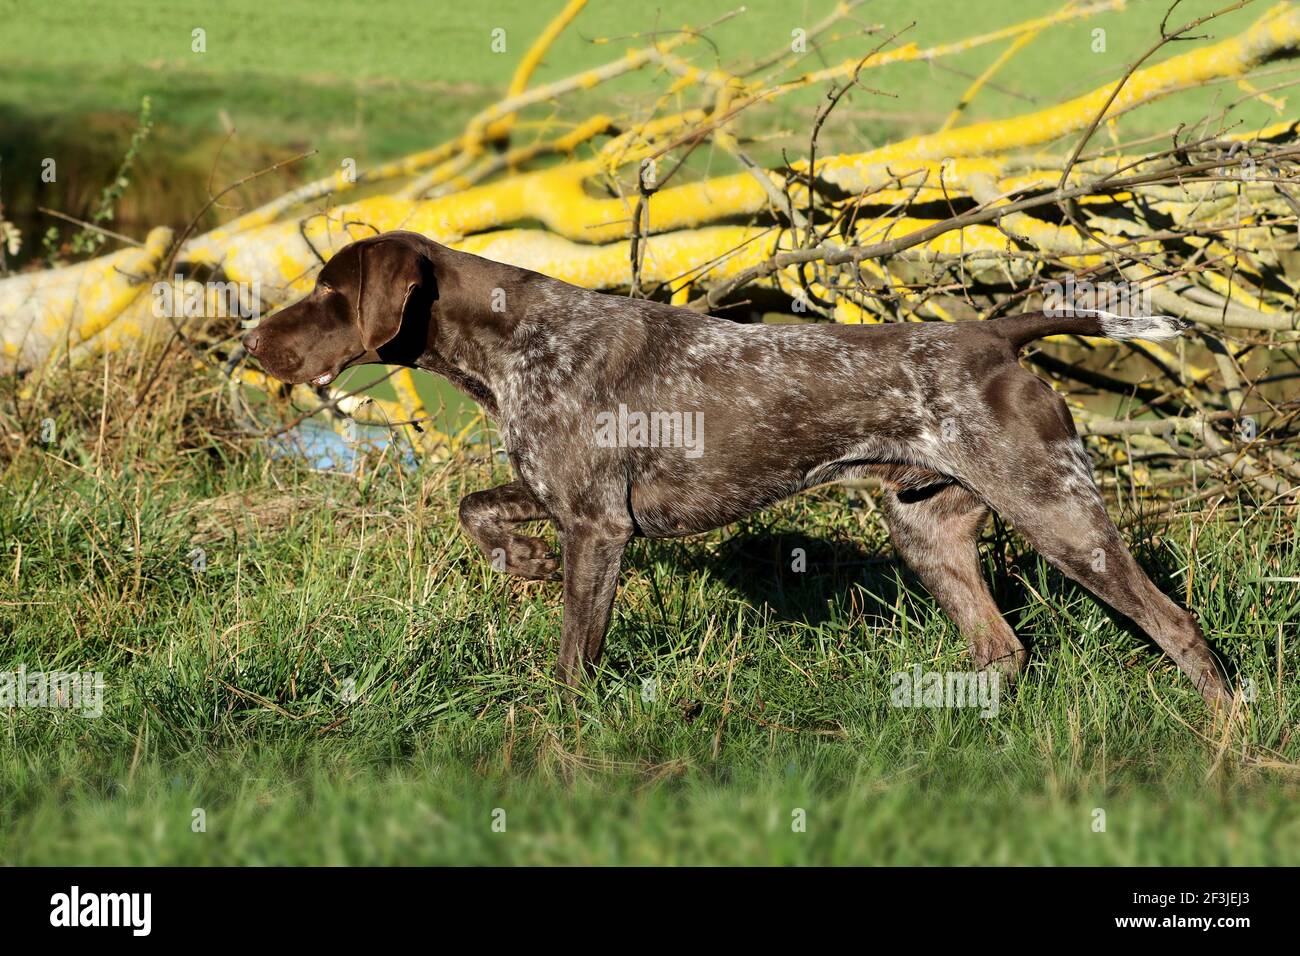 German Shorthaired Pointer. Male, 21 months old, standing in front of game birds Stock Photo